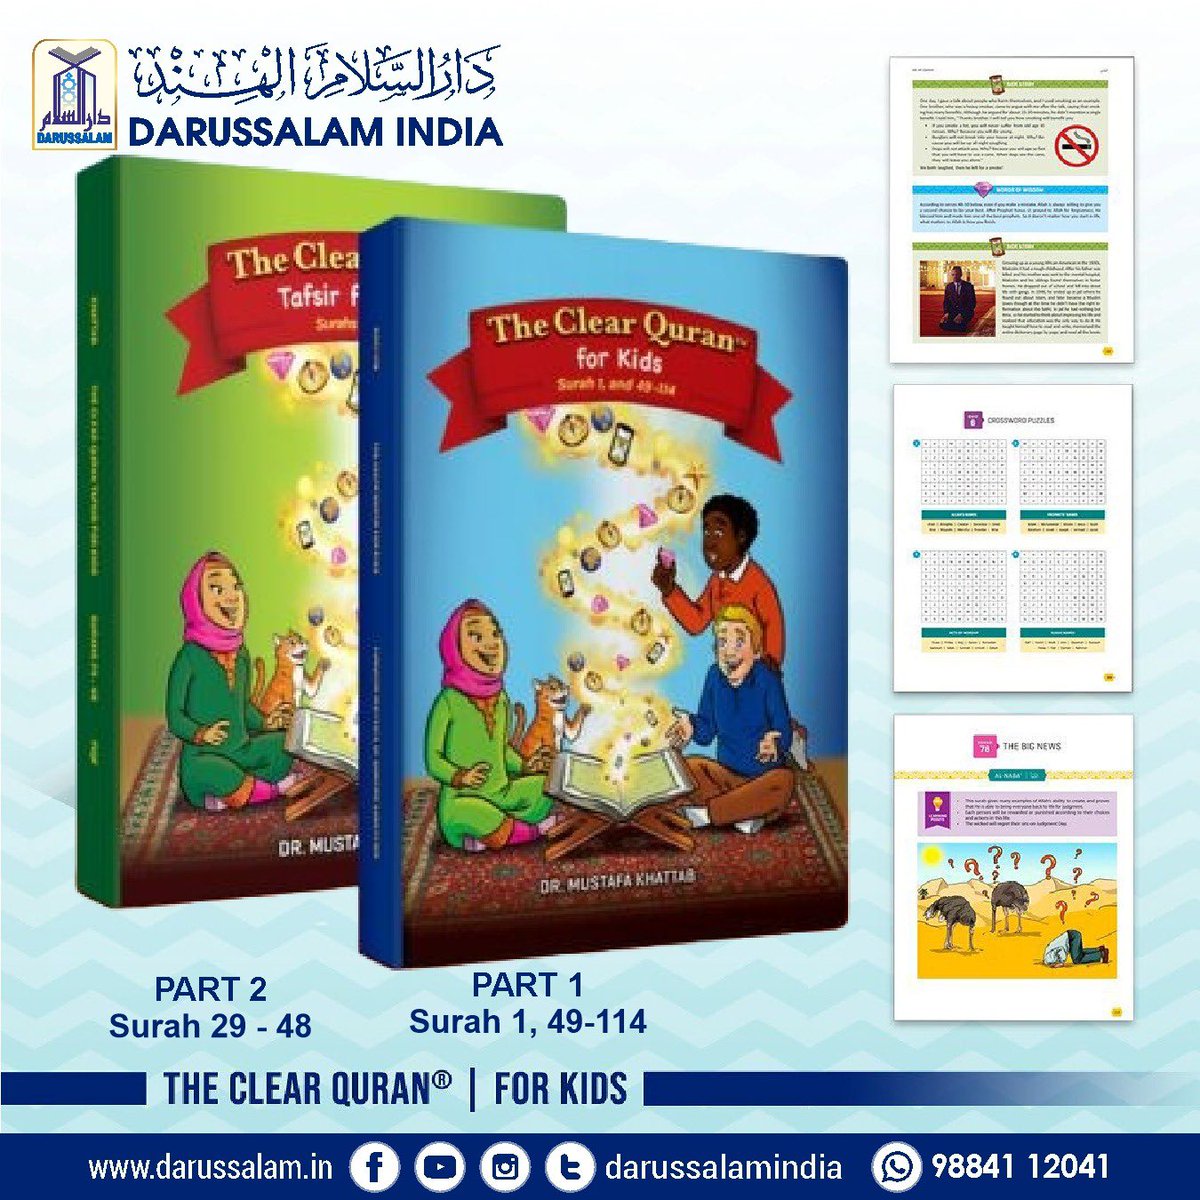 THE CLEAR QURAN SERIES FOR KIDS – WITH ARABIC TEXT | SOFTCOVER
Part 1 - 1, 49-114 | Part 2 - 29-48

Order Now:darussalamstore.in/cqk
Offer Price: ₹. 6,698/-
WhatsApp: +91 9884112041

#Quran #QuranTranslation #THECLEARQURANFORKIDS #TheClearQuran #IslamicBooks #darussalamindia